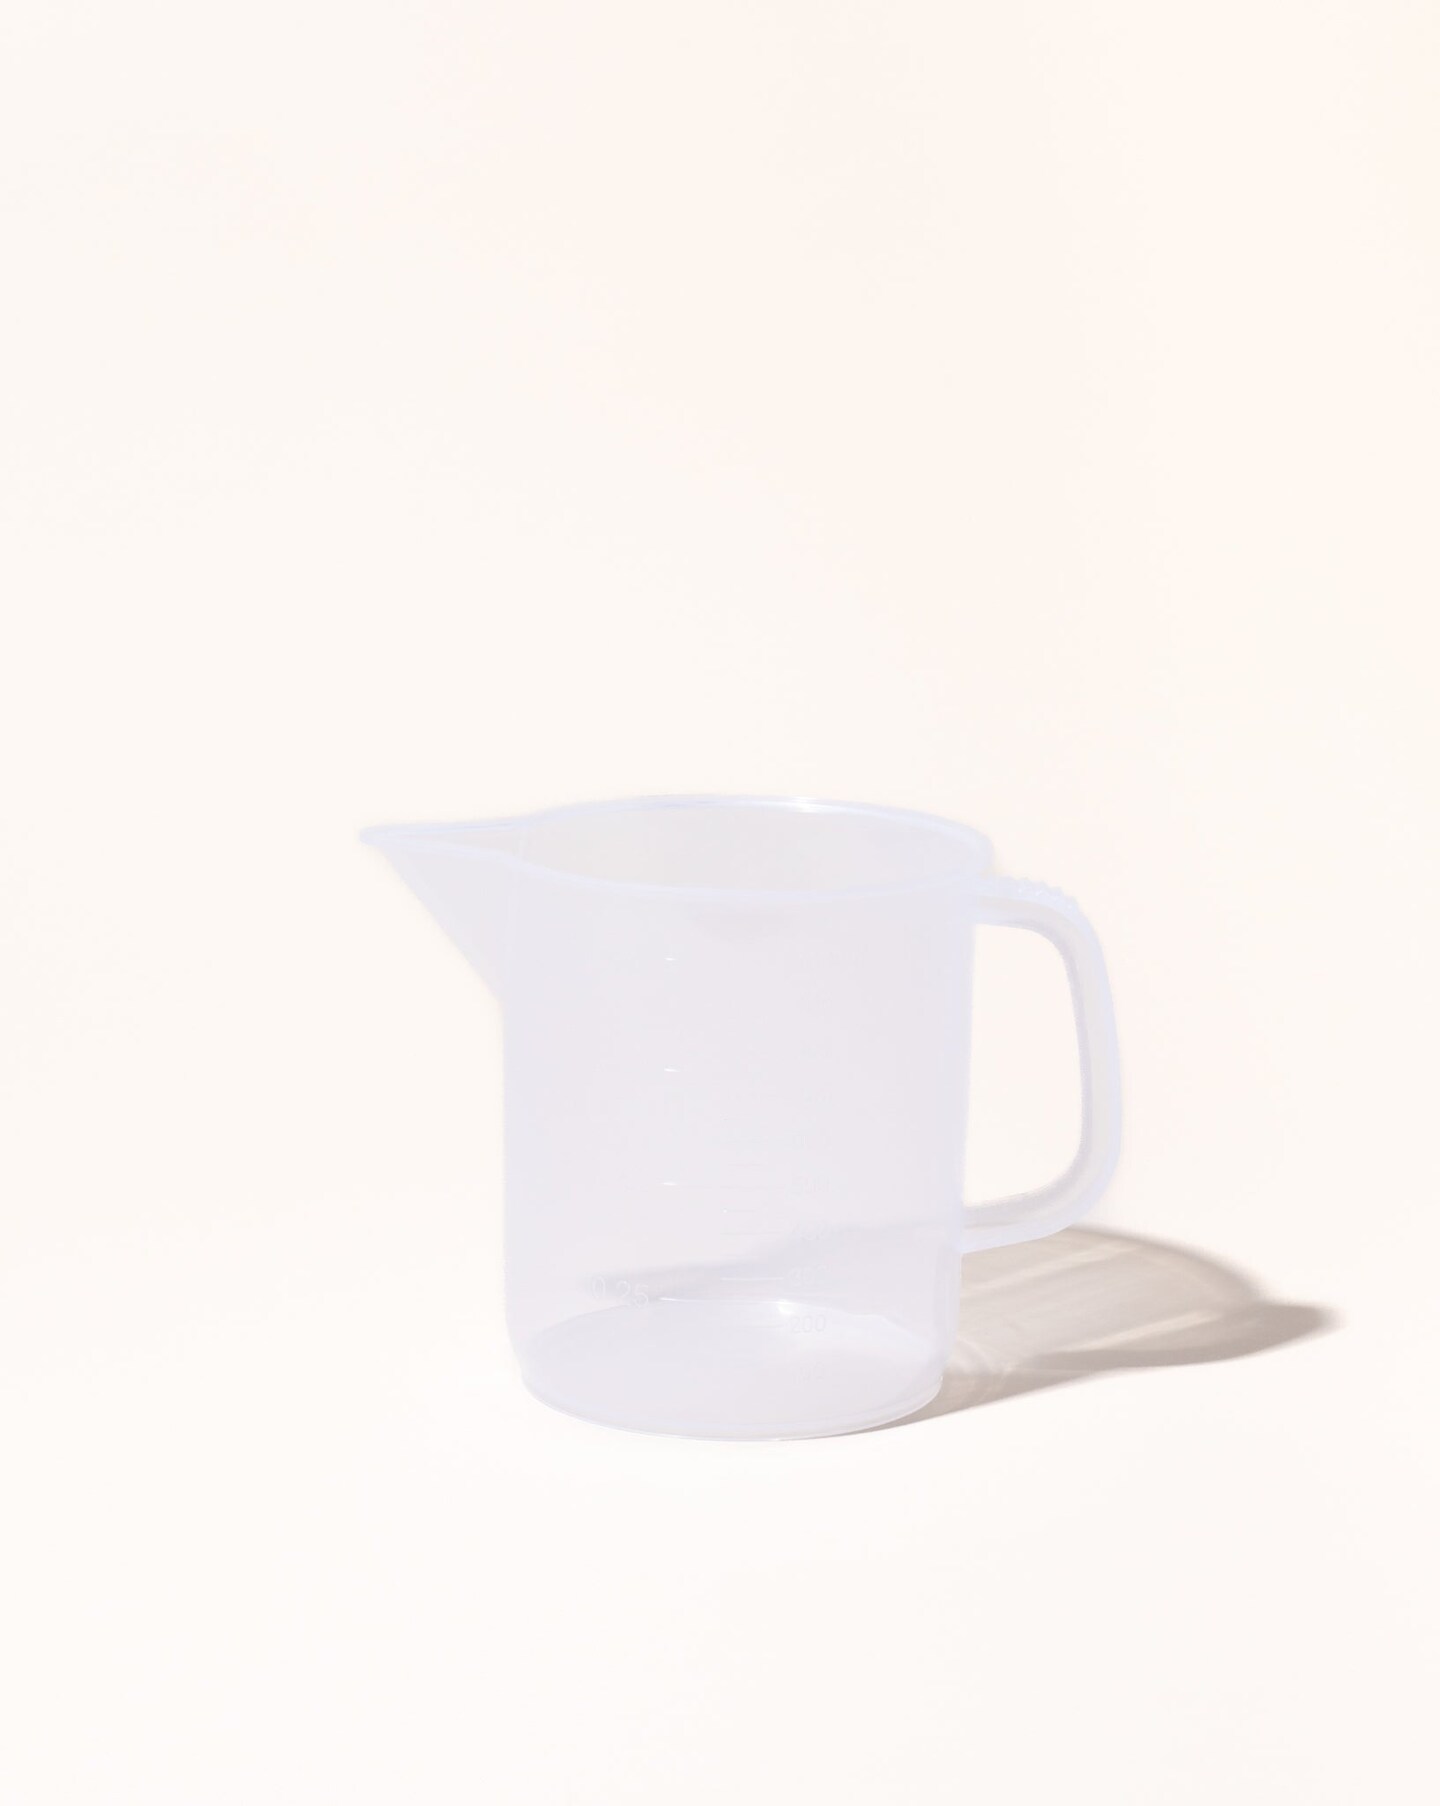 1000ml Pouring Pitcher for Making Candles, Soap, Skincare